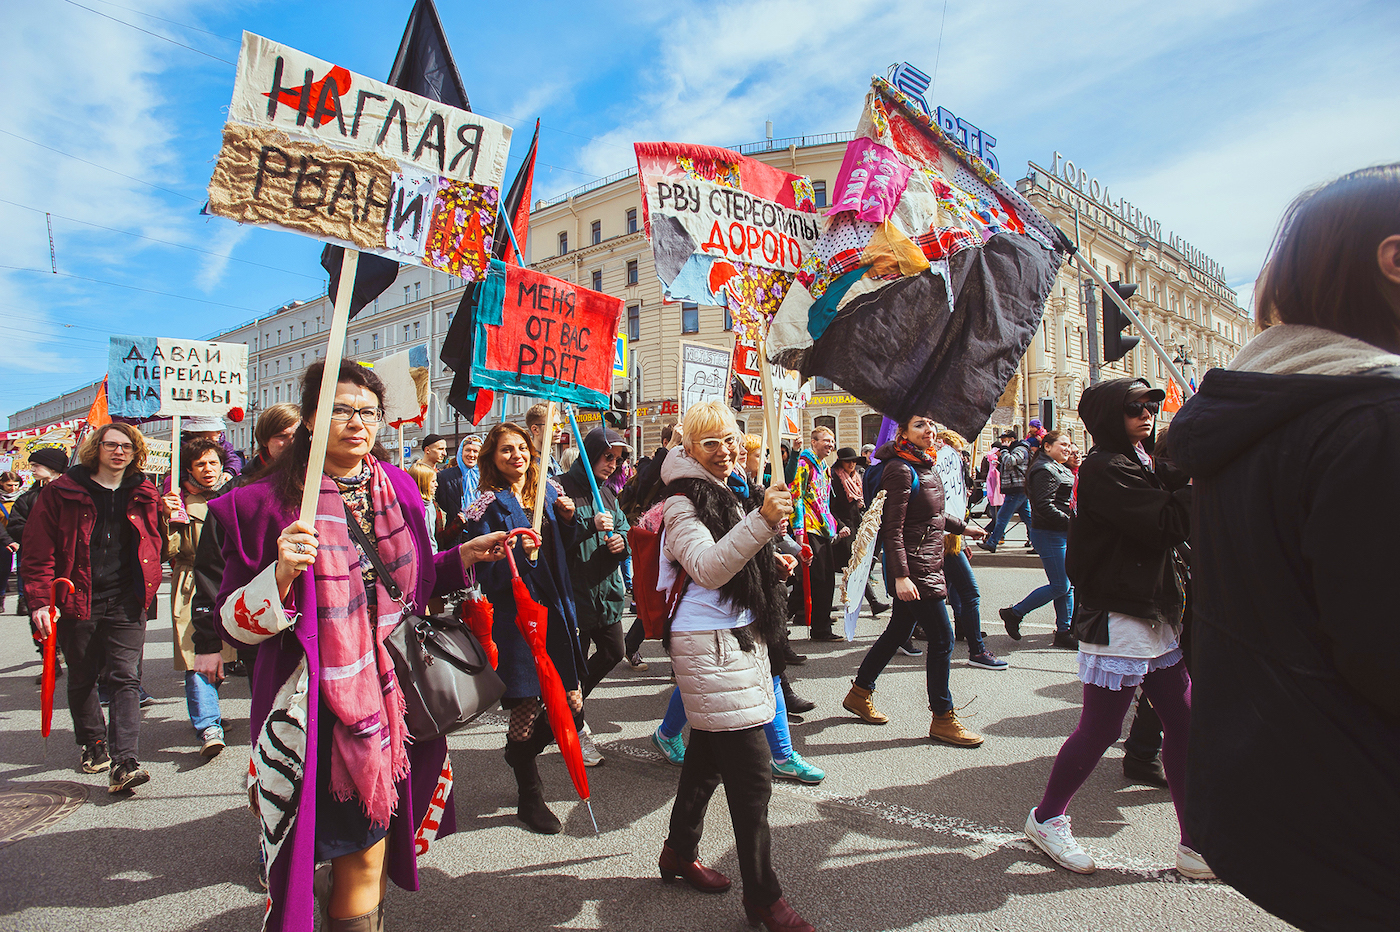 Ragged Block action performance. St Petersburg, 2017. Queer feminist art group Unwanted Organisation taking part in the May Day Parade along with a sex workers rights group Silver Rose